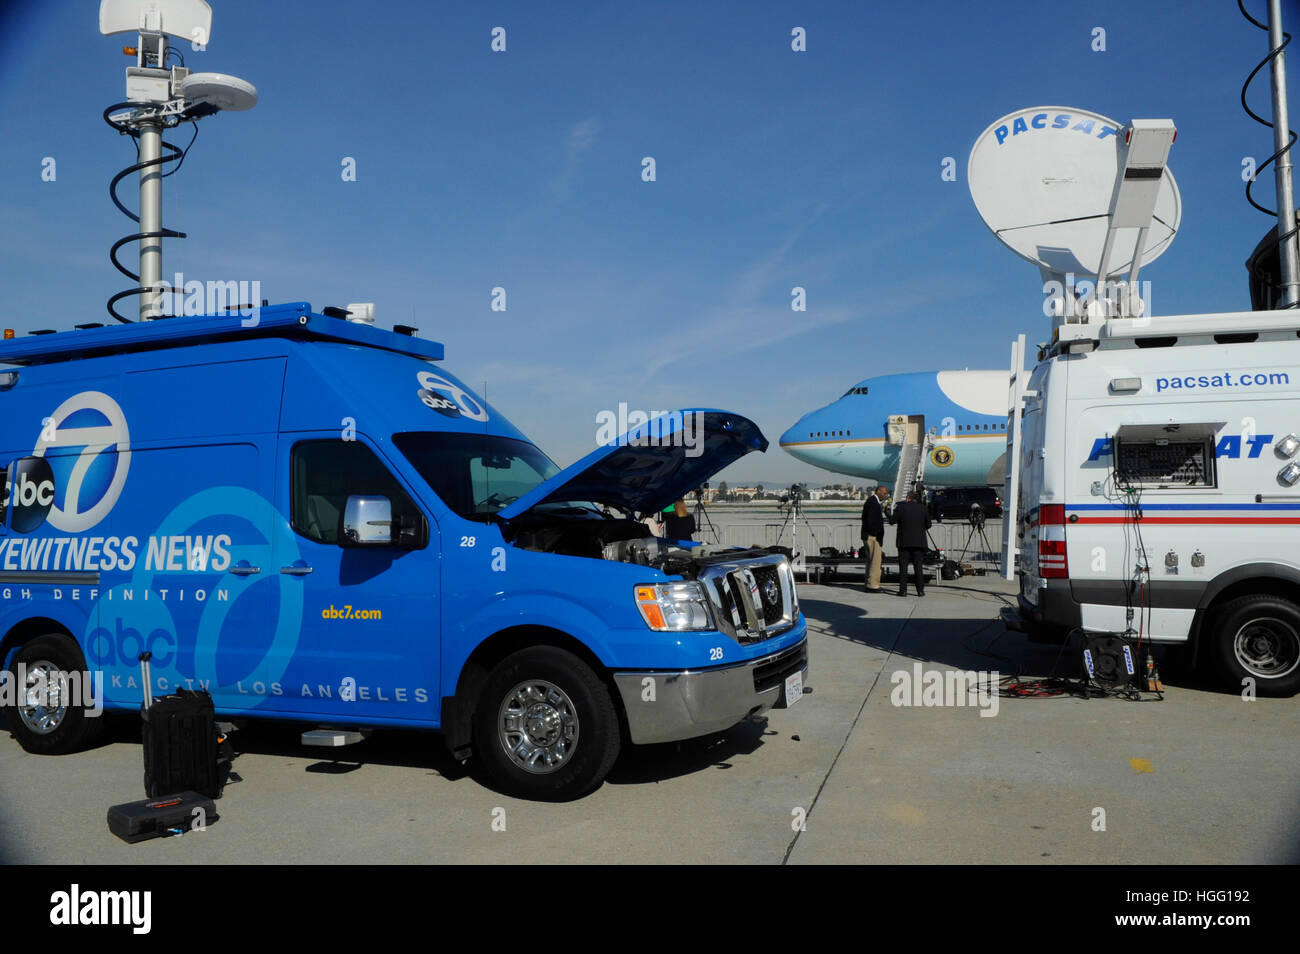 Press media set-up in front of Air Force One at LAX Airport on February 12th, 2016 in Los Angeles, California. Stock Photo